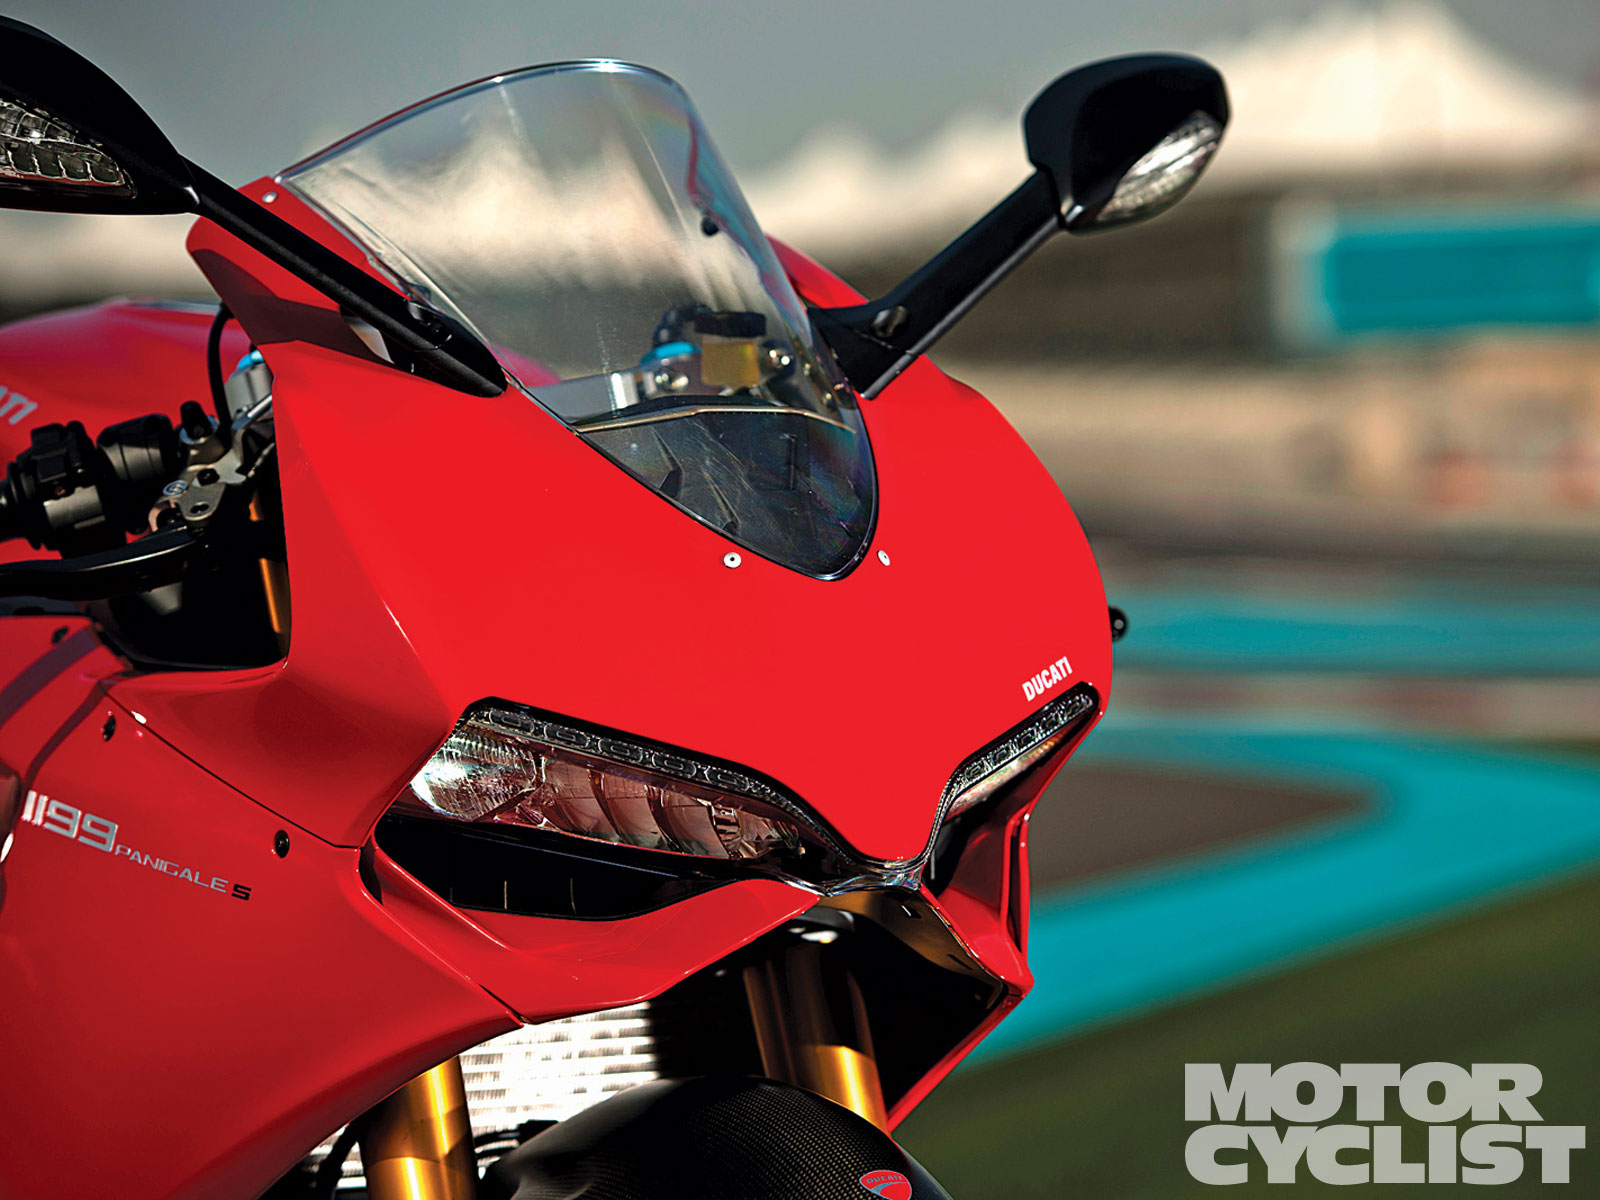 122-1205-01-o+ducati-1199-panigale-s-front+